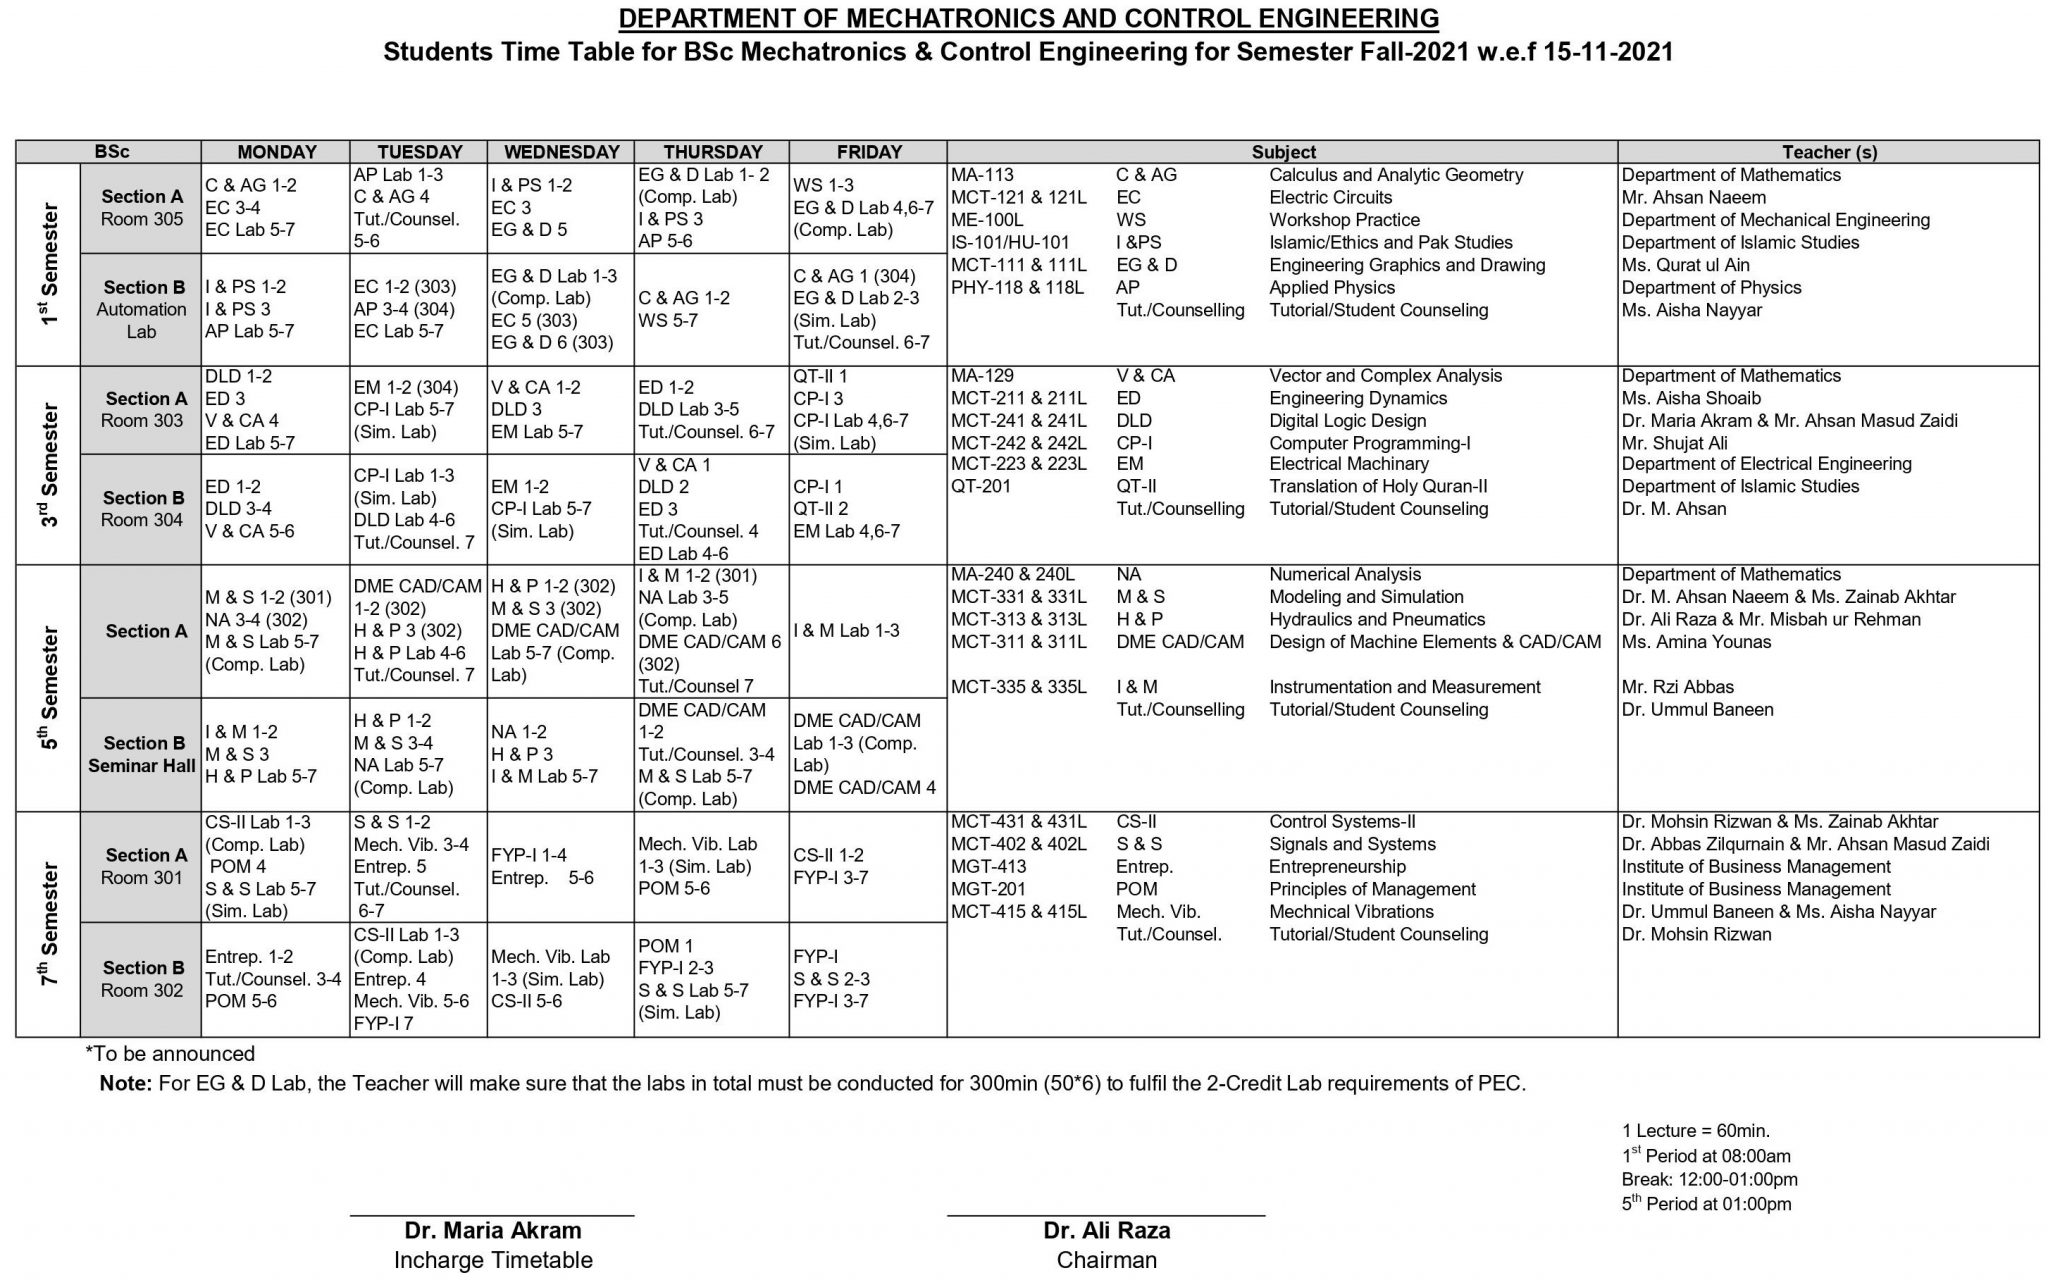 Time Table for BSc Mechatronics & Control Engineering Fall Semester